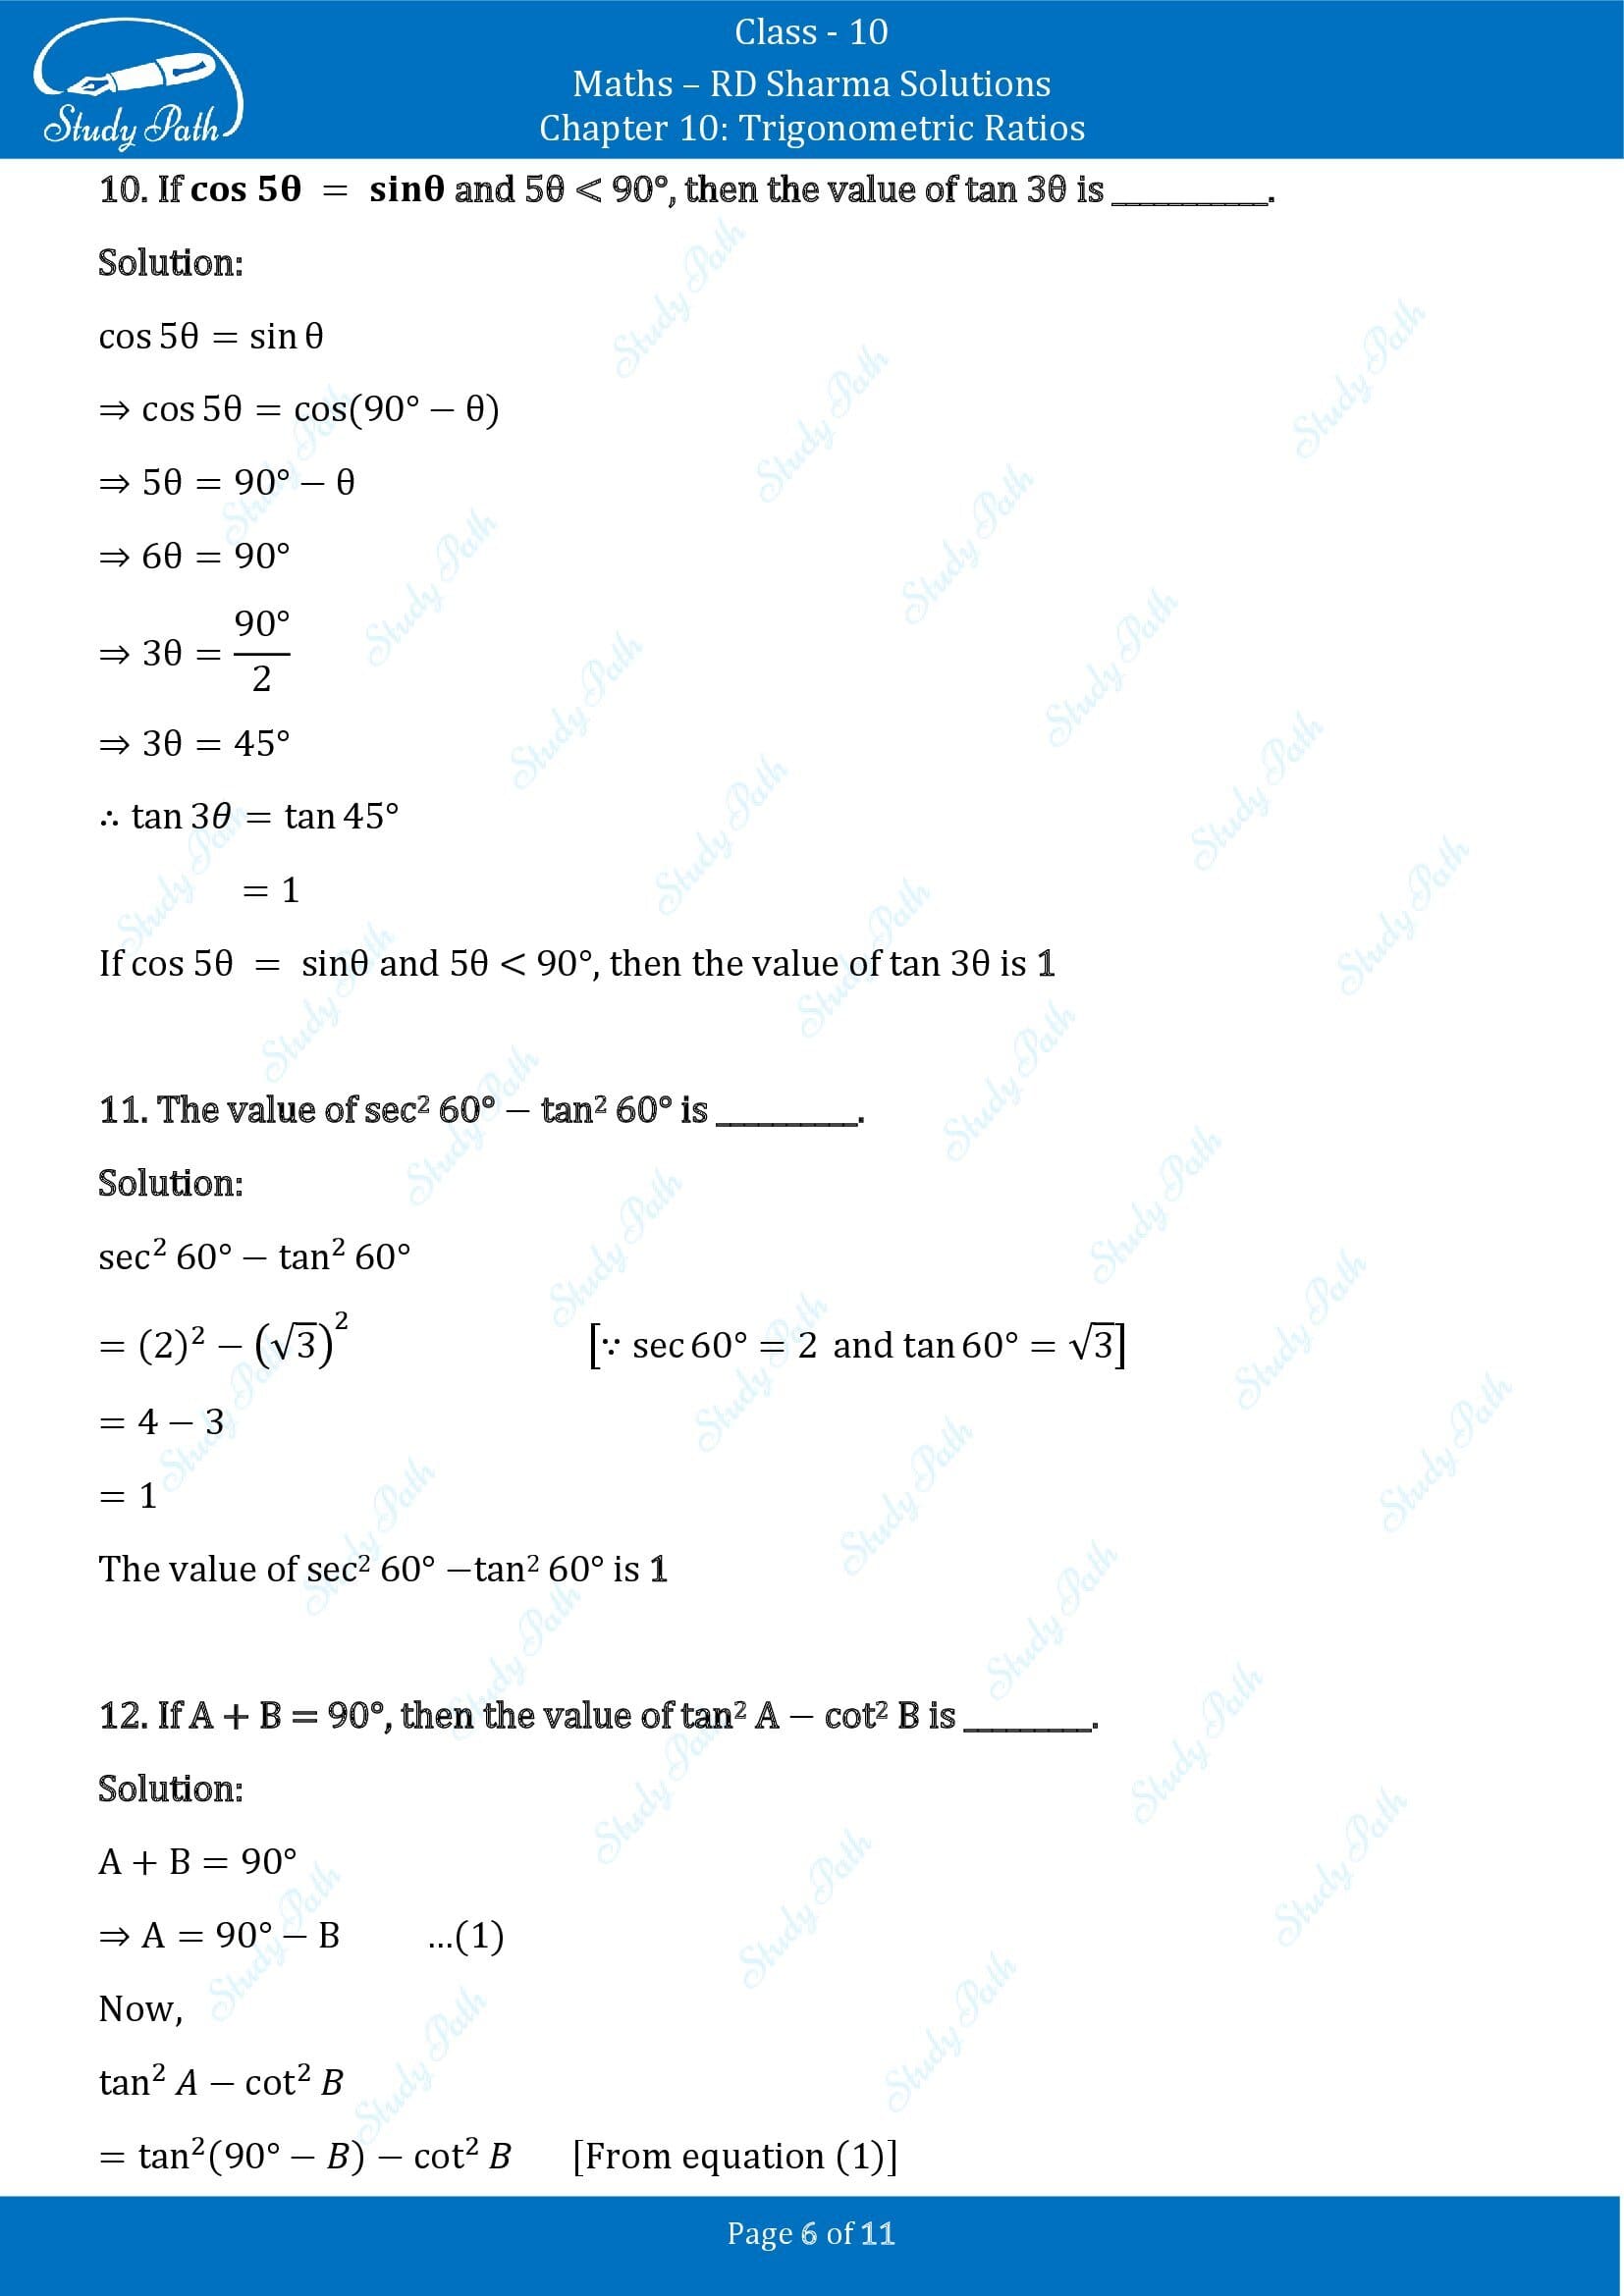 RD Sharma Solutions Class 10 Chapter 10 Trigonometric Ratios Fill in the Blank Type Questions FBQs 00006